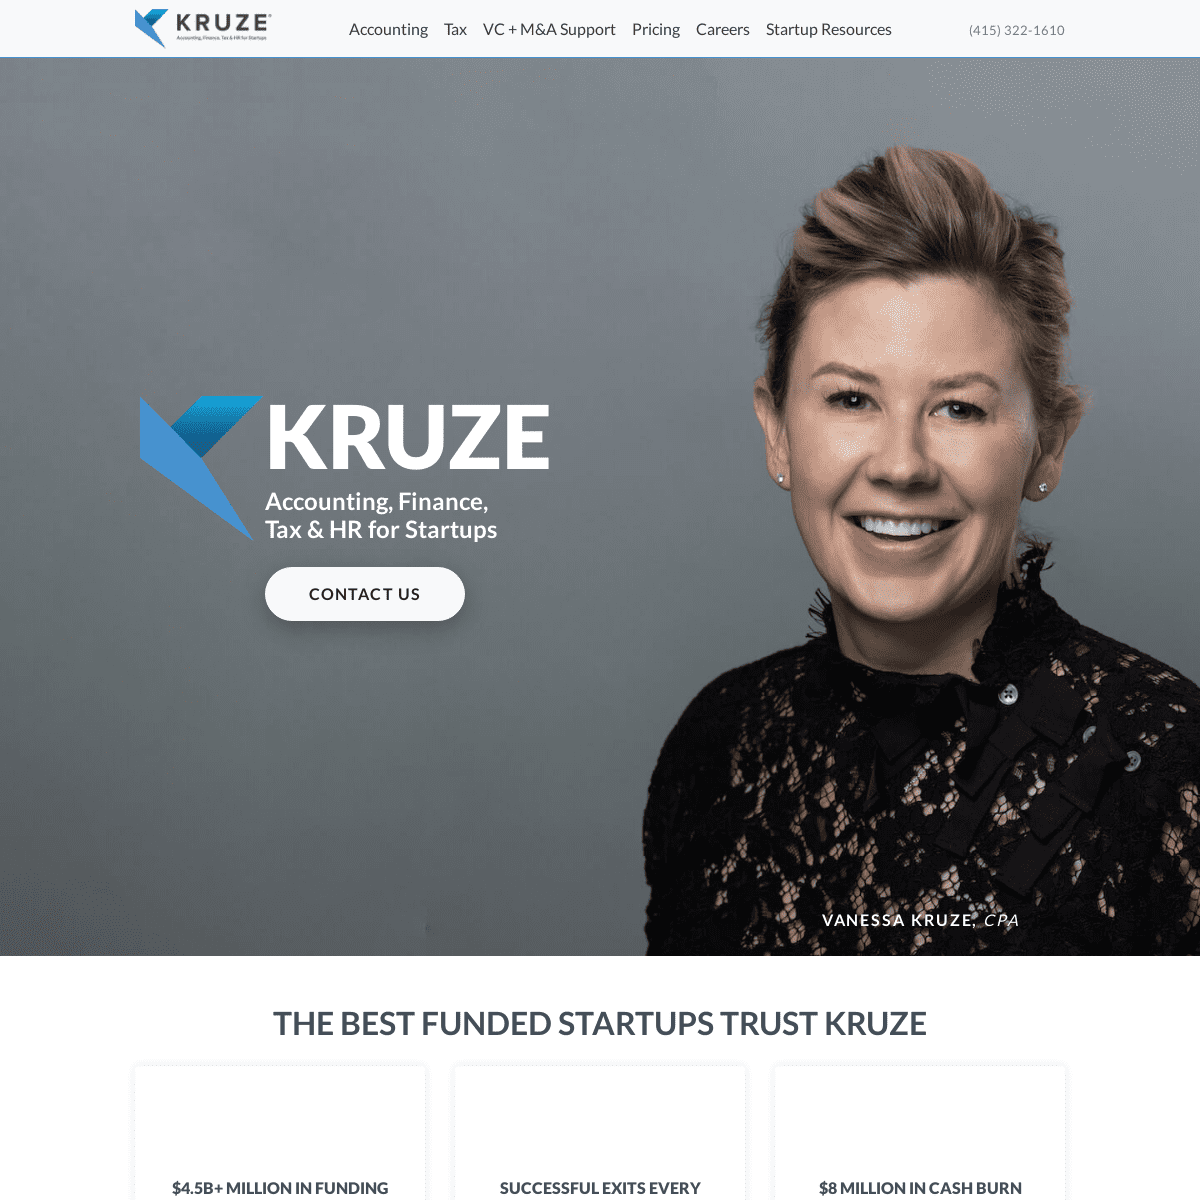 A complete backup of https://kruzeconsulting.com